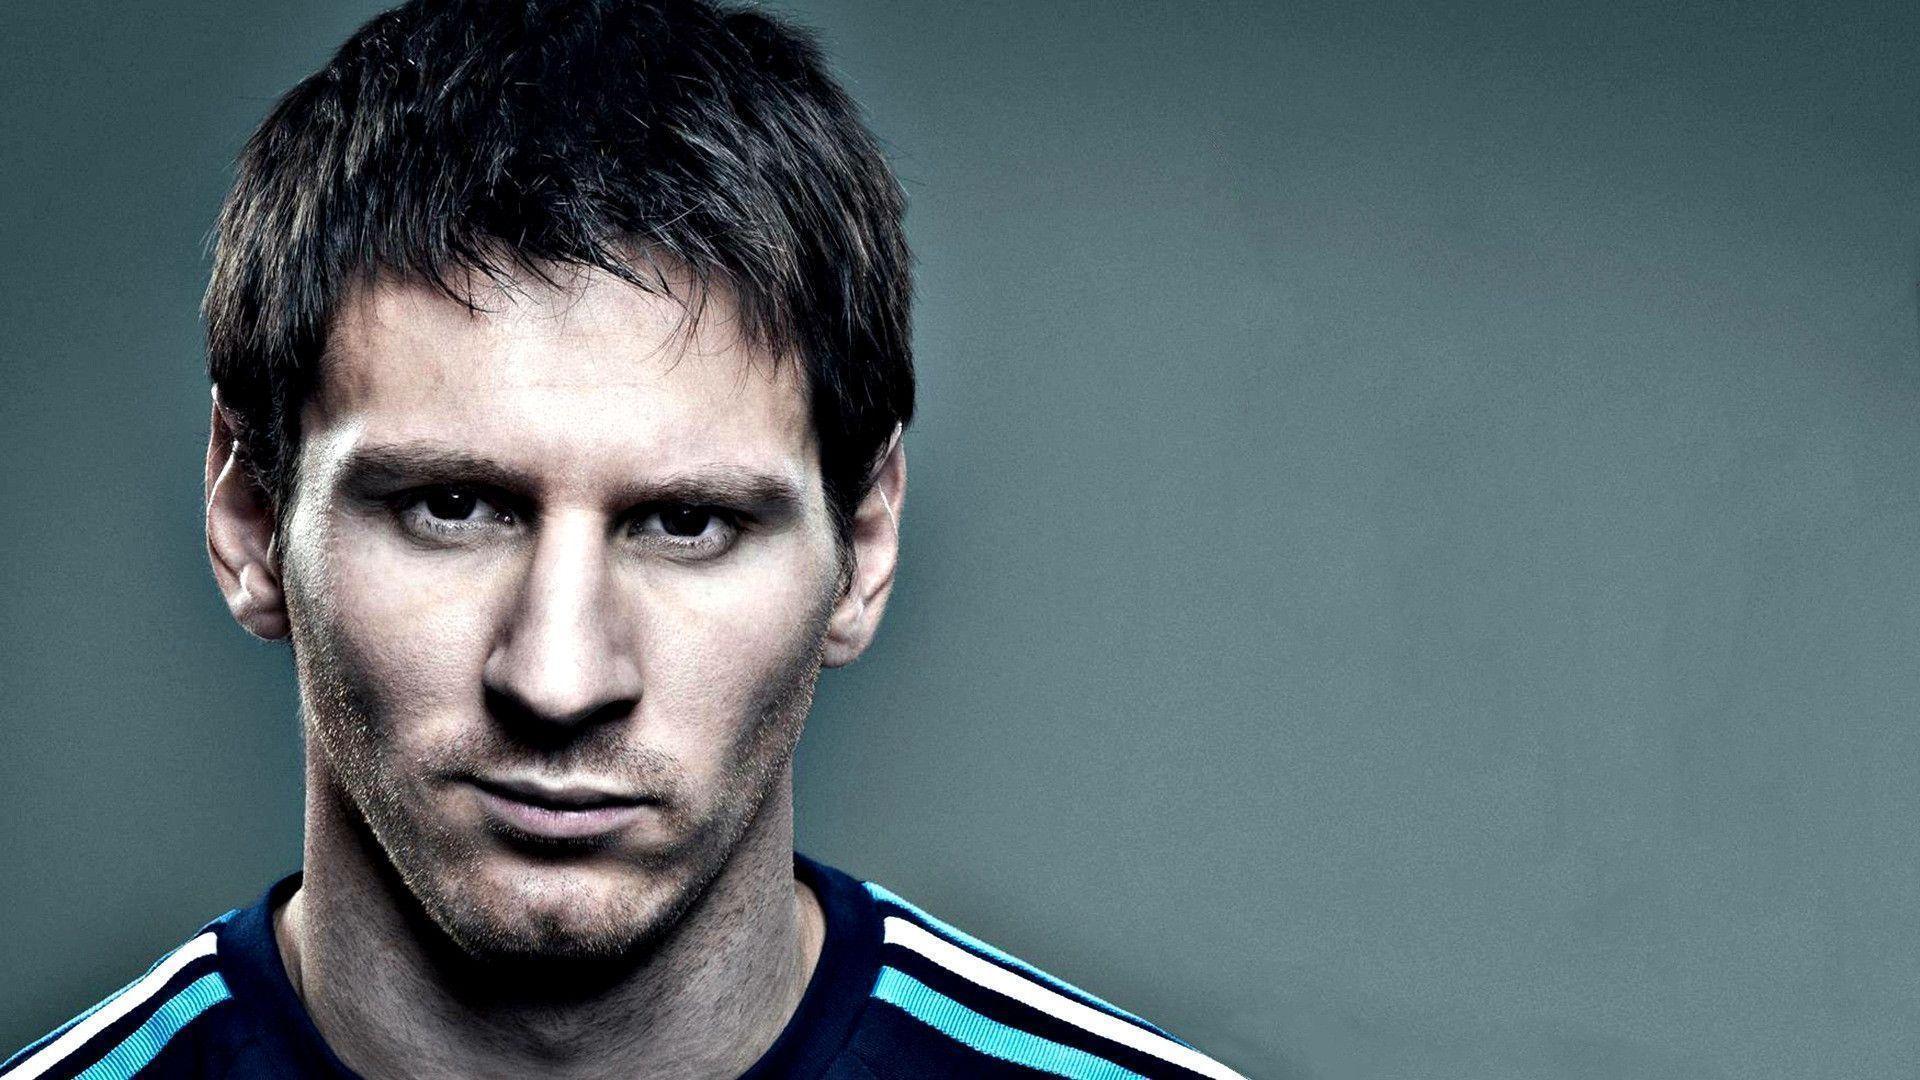 Lionel Messi 1080p HD Wallpapers